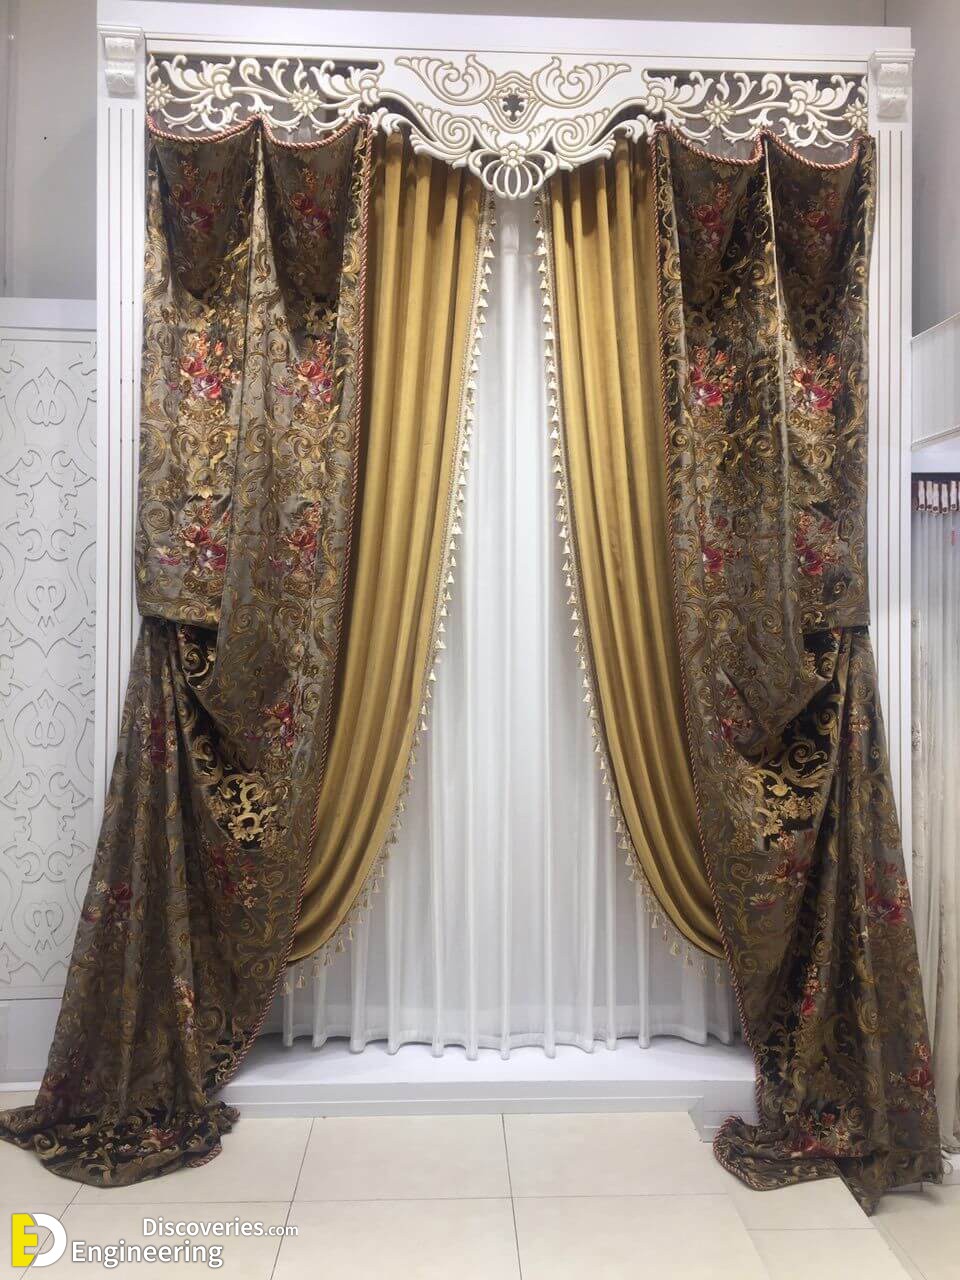 Top 40 Modern Curtain Ideas - Engineering Discoveries